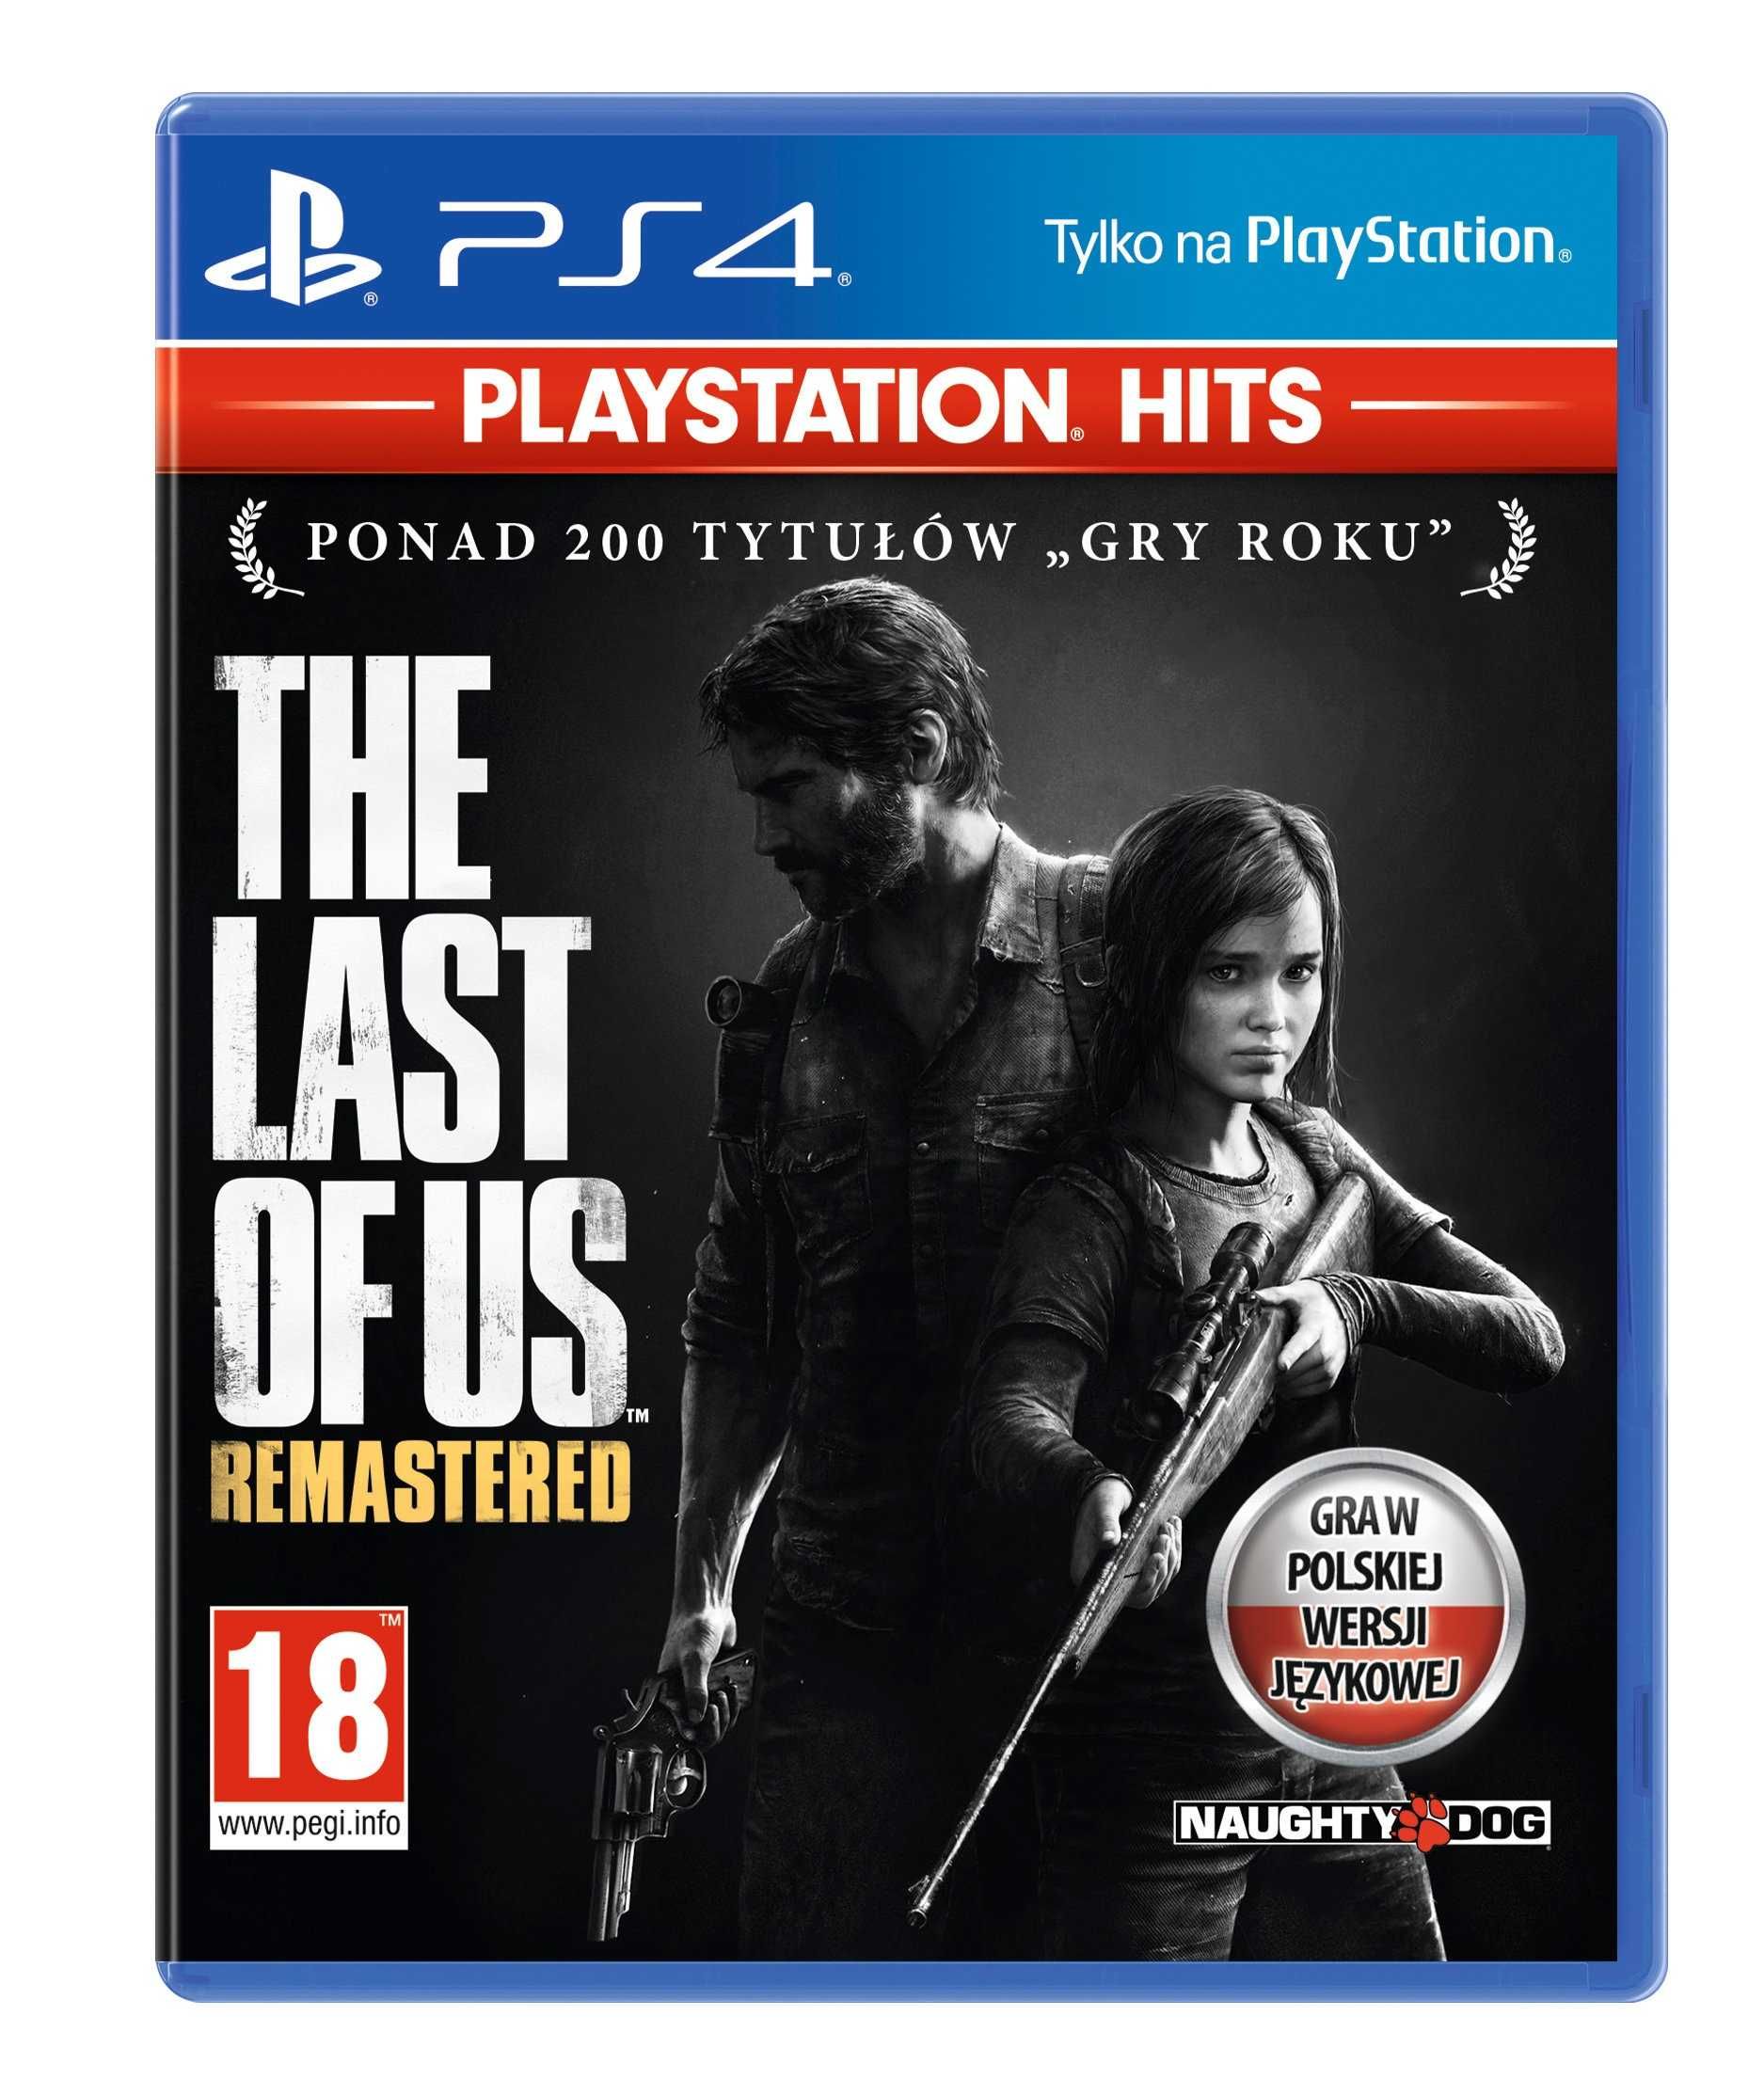 PS4 THE LAST OF US REMASTERED PL Games4Us Rzgowska 100/102